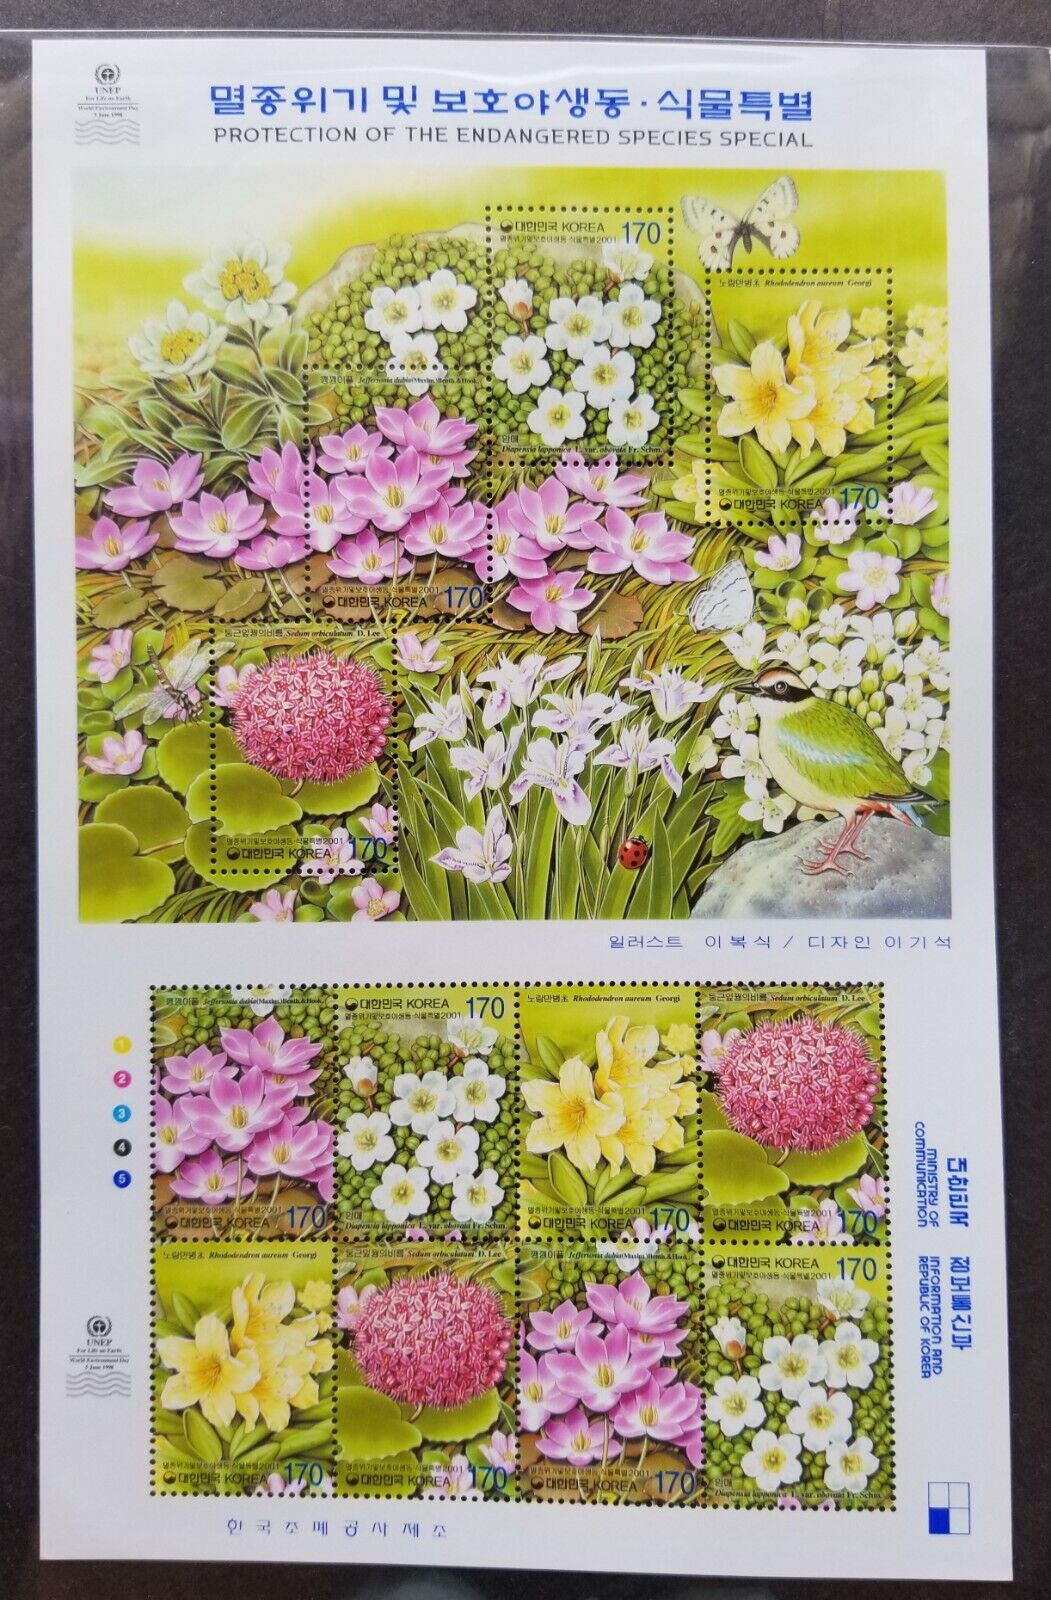 Korea Protection Endangered Species 2001 Flower Dragonfly Butterfly Sheetlet MNH